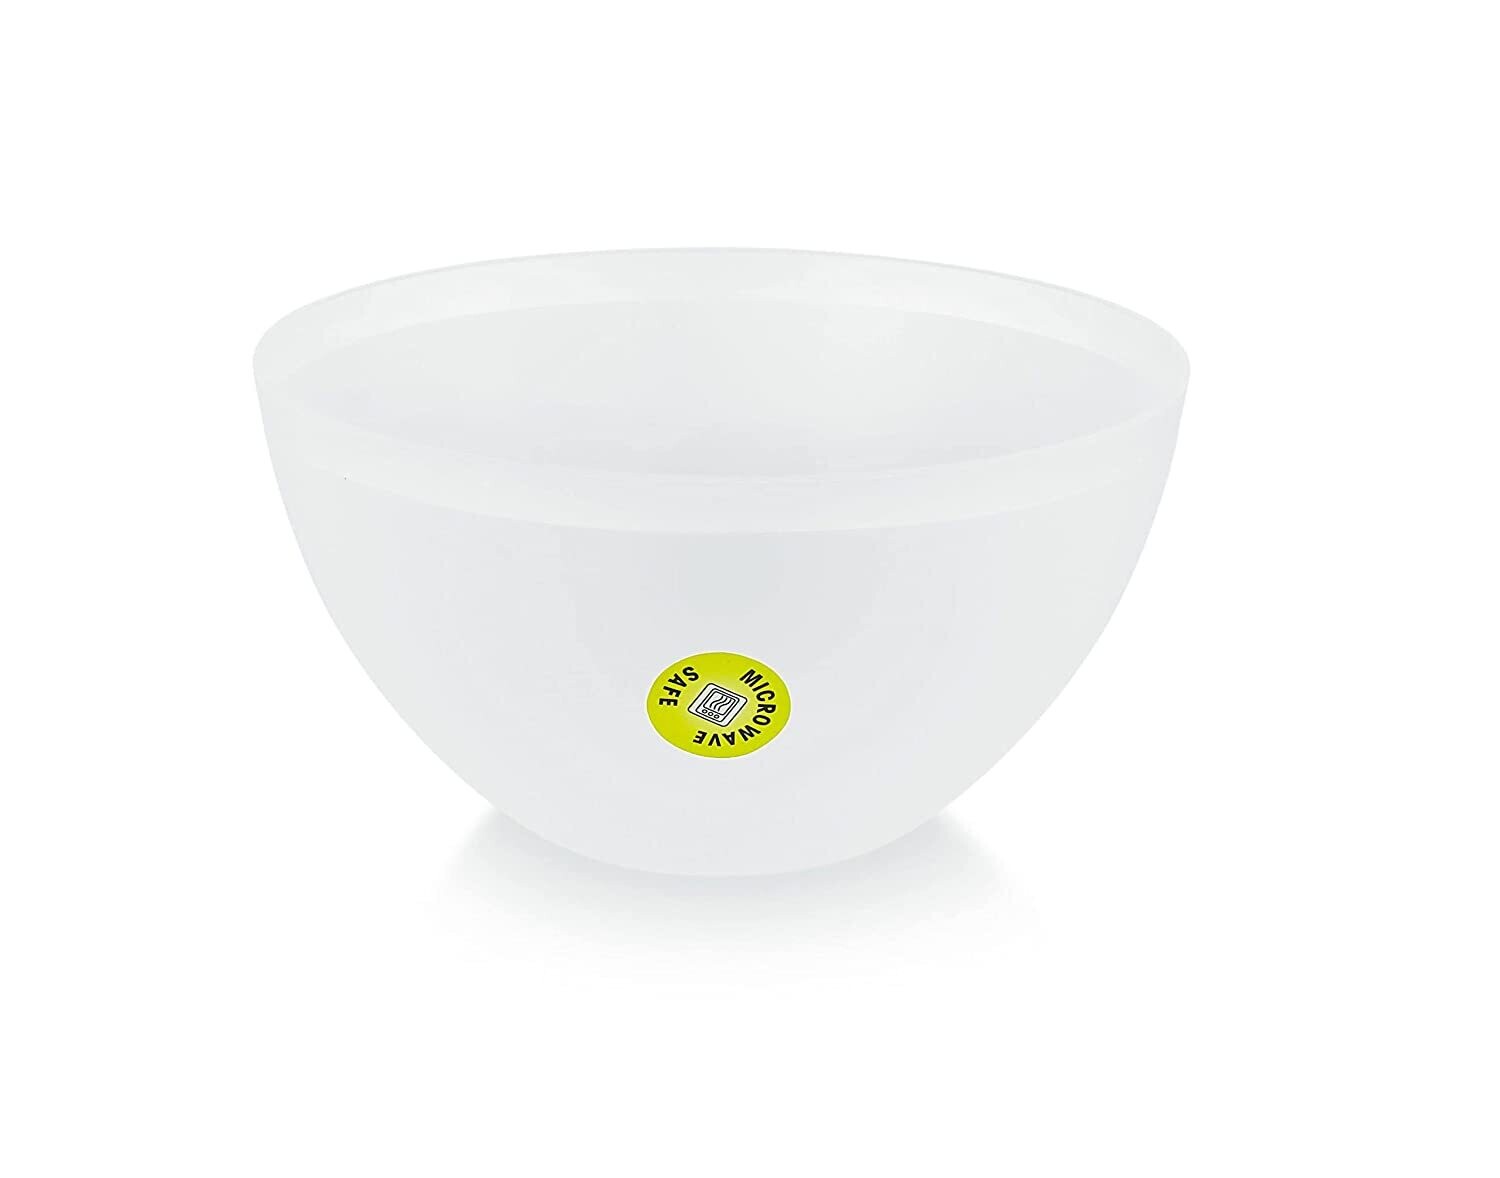 Small (S) Size (800ml) Mixing Bowl Set (1Pc Random Colour) for Mixing cake, Batter, Melt Chocolate, Ice Cream, Food Grade